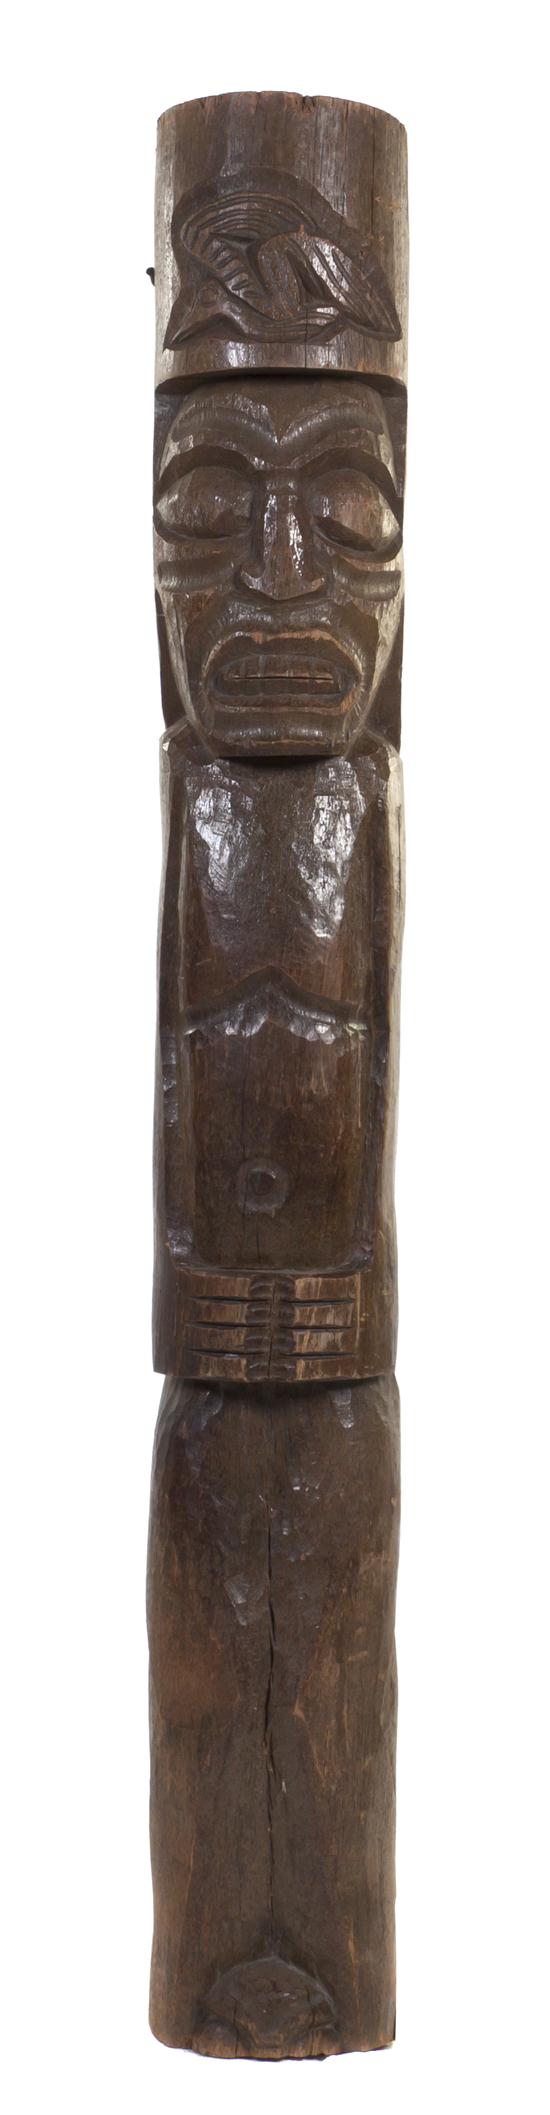 A Carved Wood Tiki Totem of cylindrical 1554cc